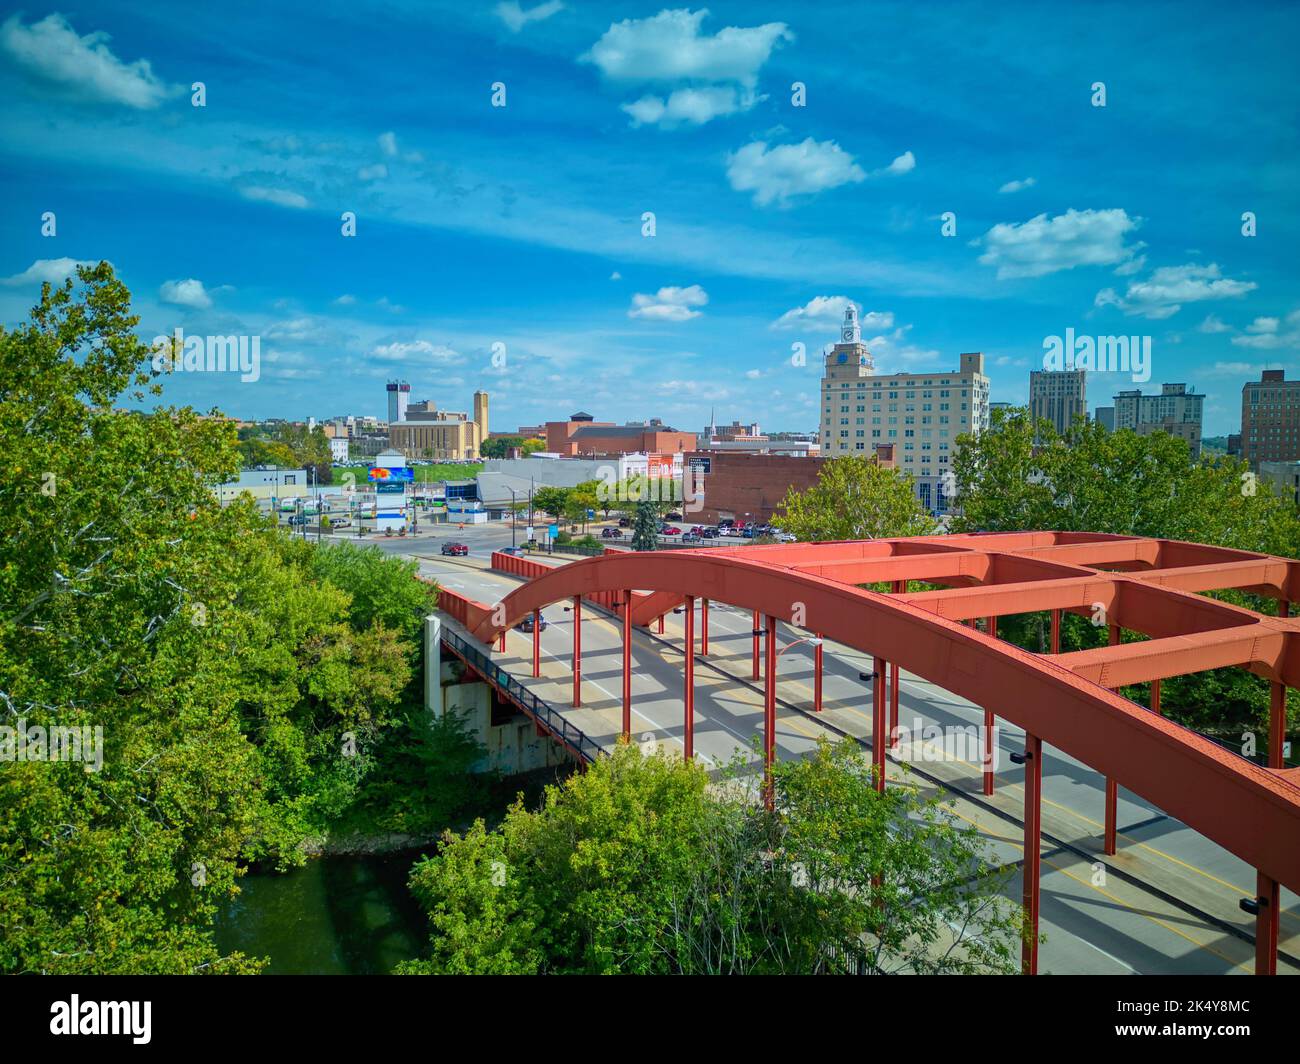 An aerial view of downtown Youngstown, Ohio seen from the perspective of the Mahoning Ave Bridge Stock Photo